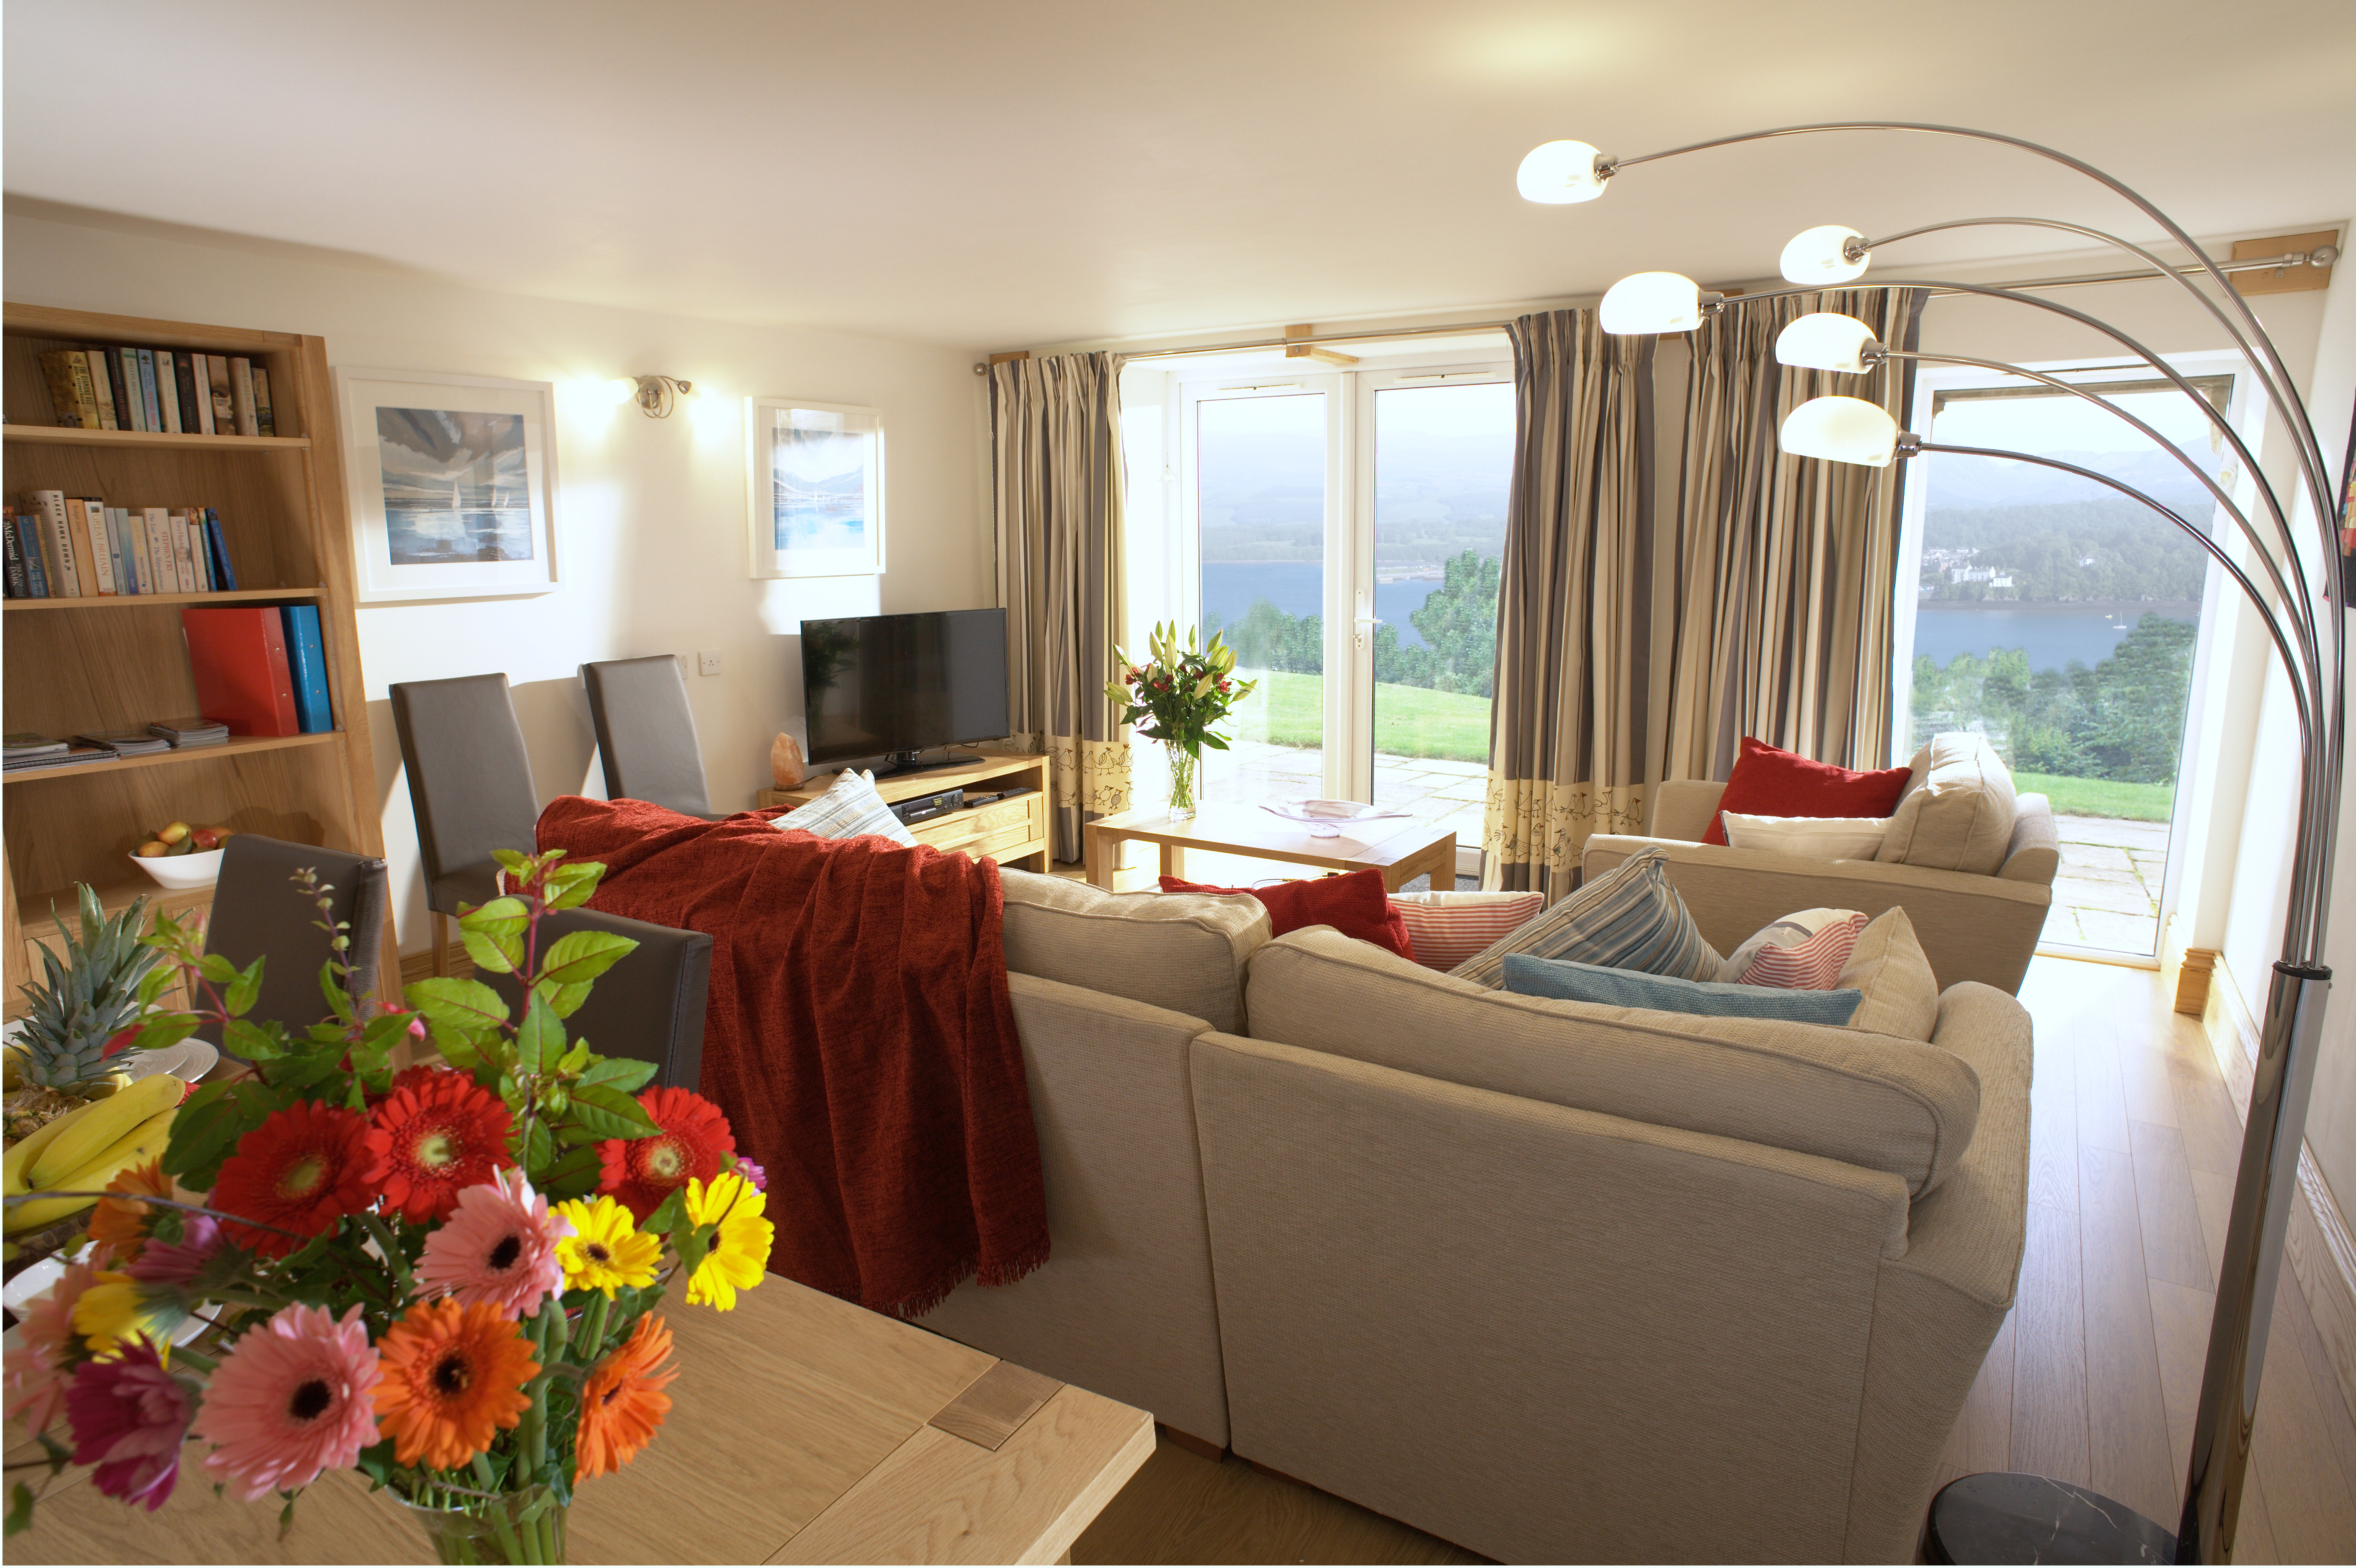 Lounge with magnificent view of Menai Strait and Snowdonia